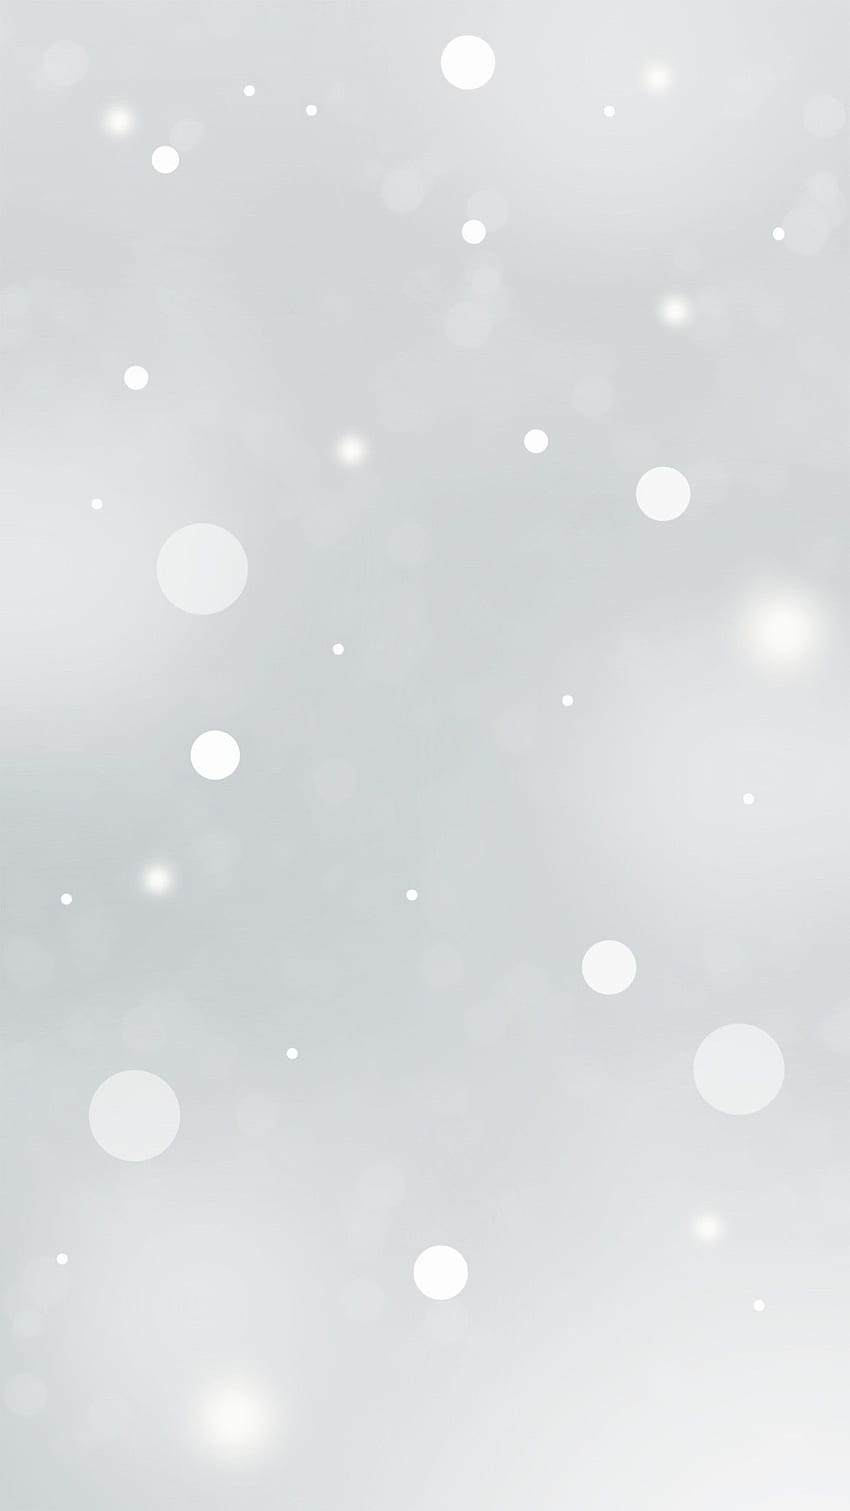 A silver background with white dots and bokeh lights - White Christmas